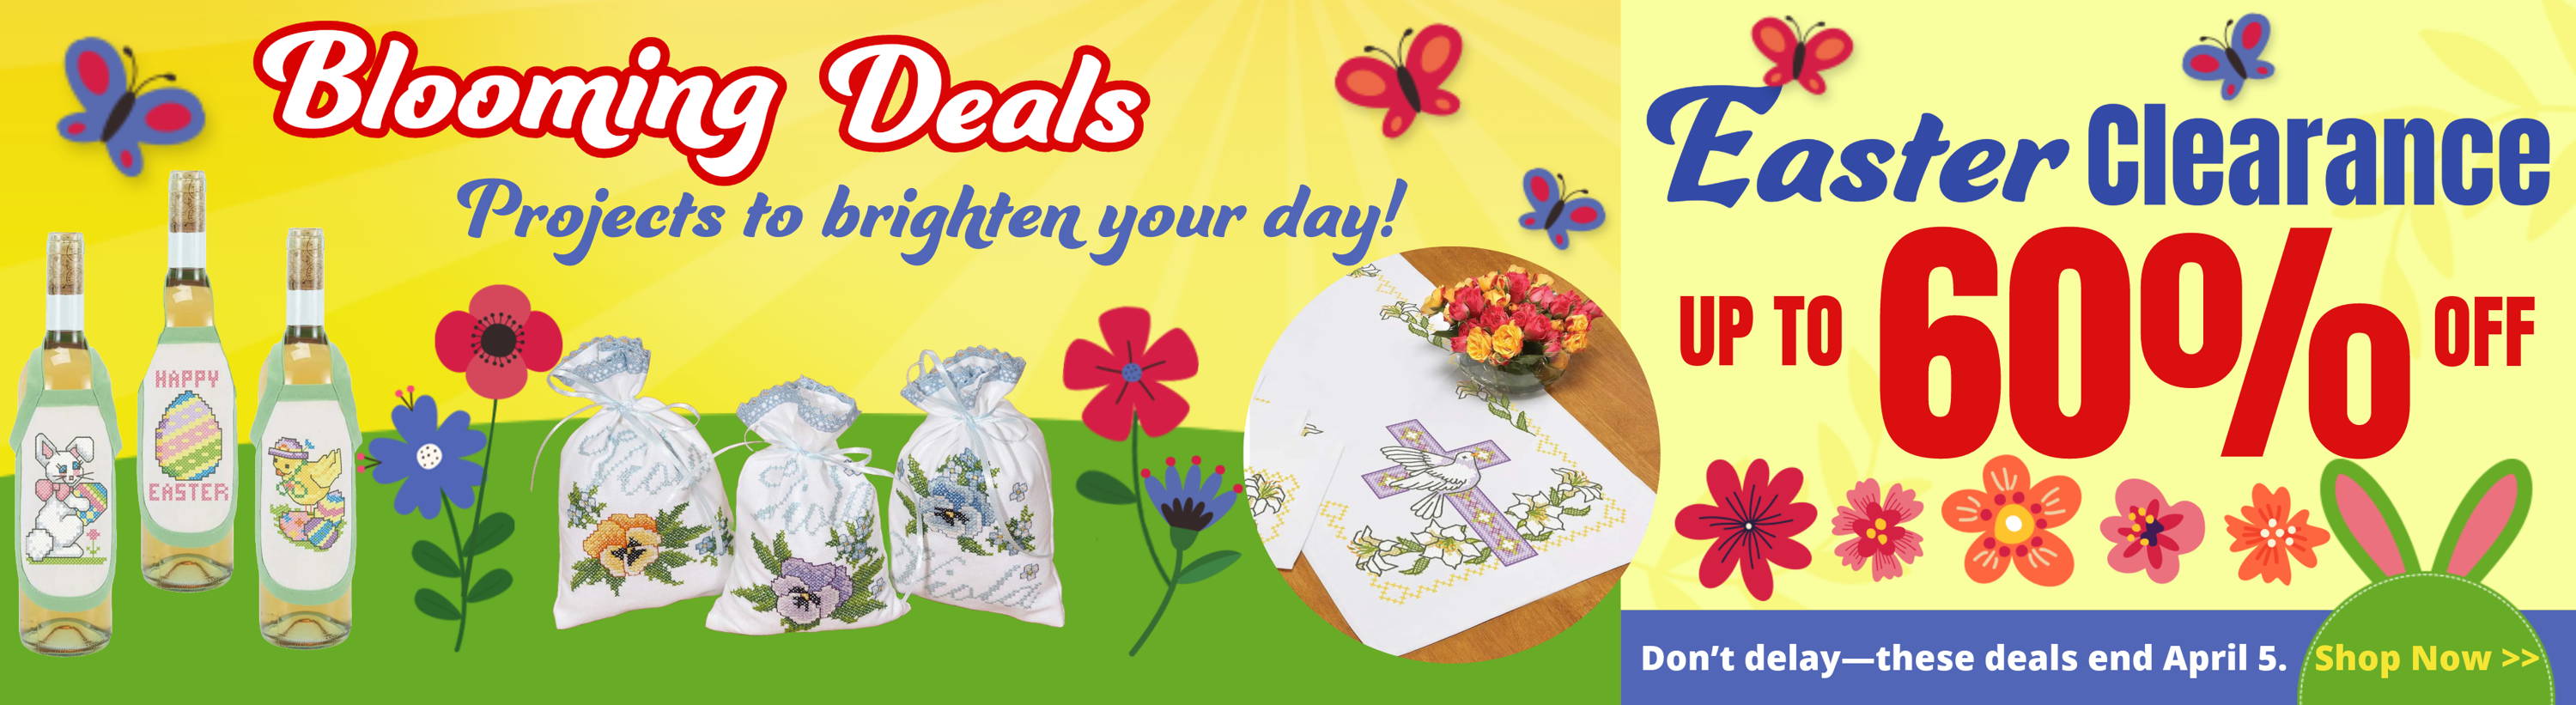 Blooming Deals! Easter Clearance up to 60% Off until April 5. Images: Featured Easter crafts.